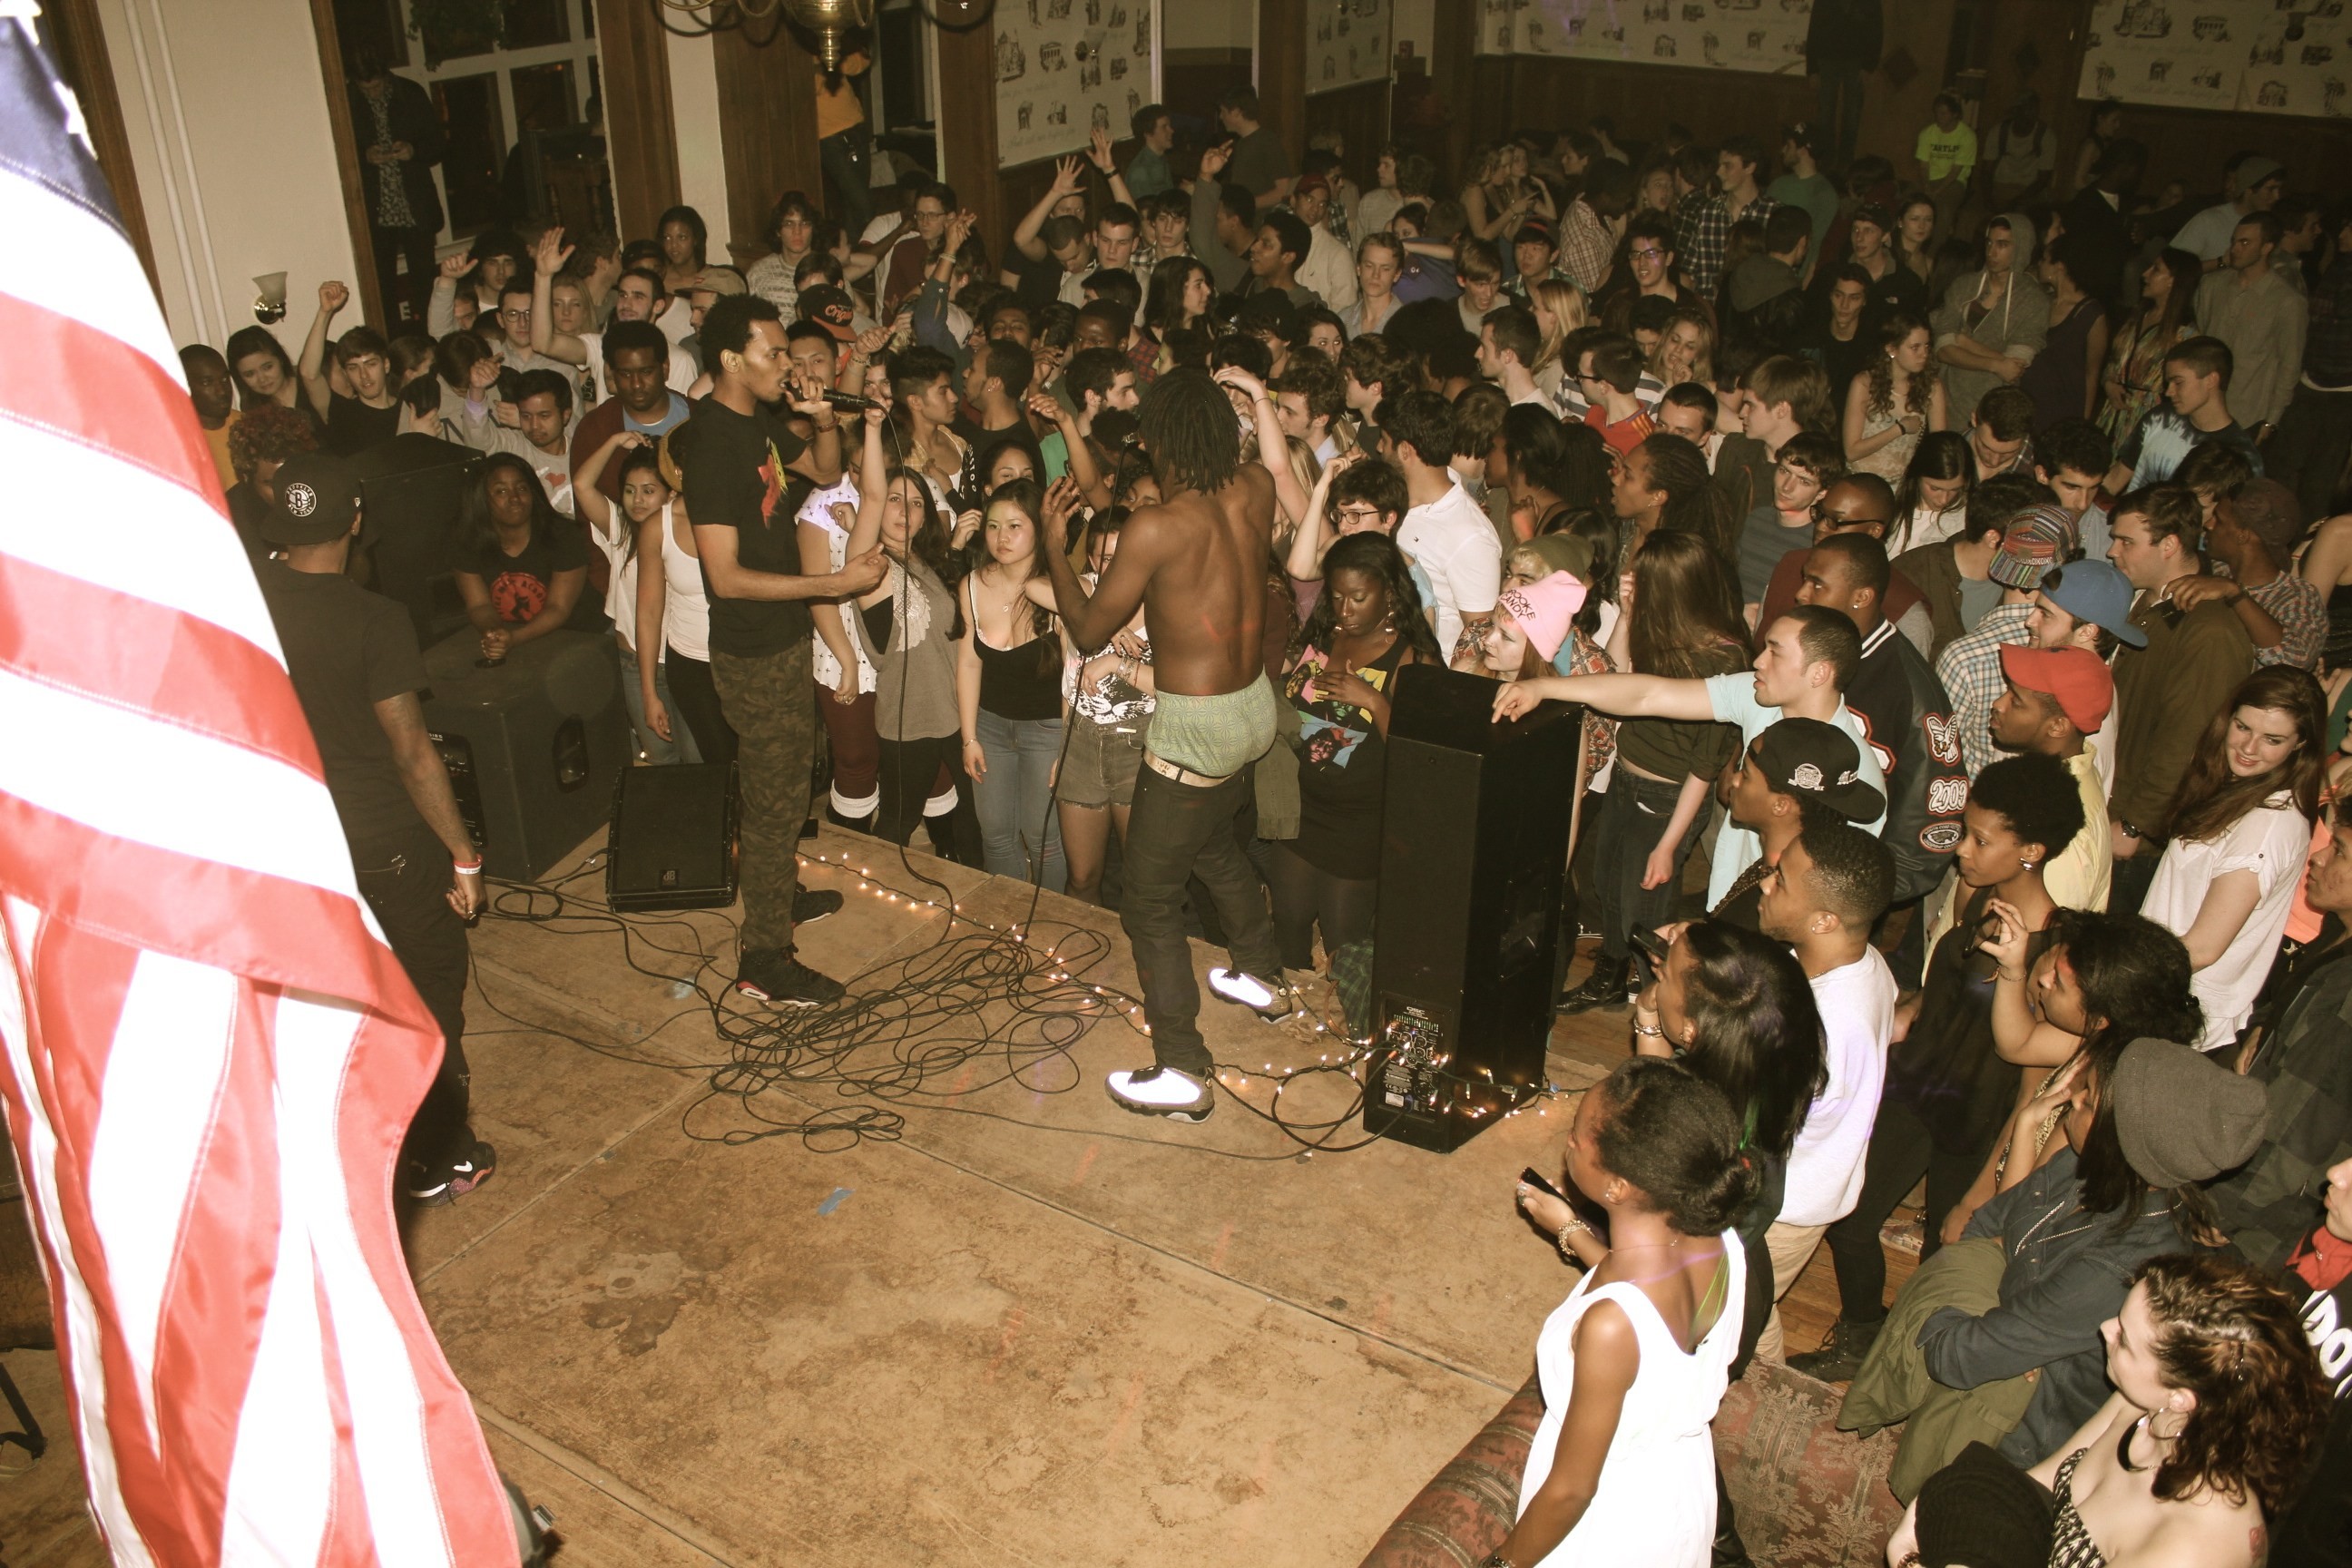 Waves Magazine Drops First Issue, Posts Flatbush Zombies Photos